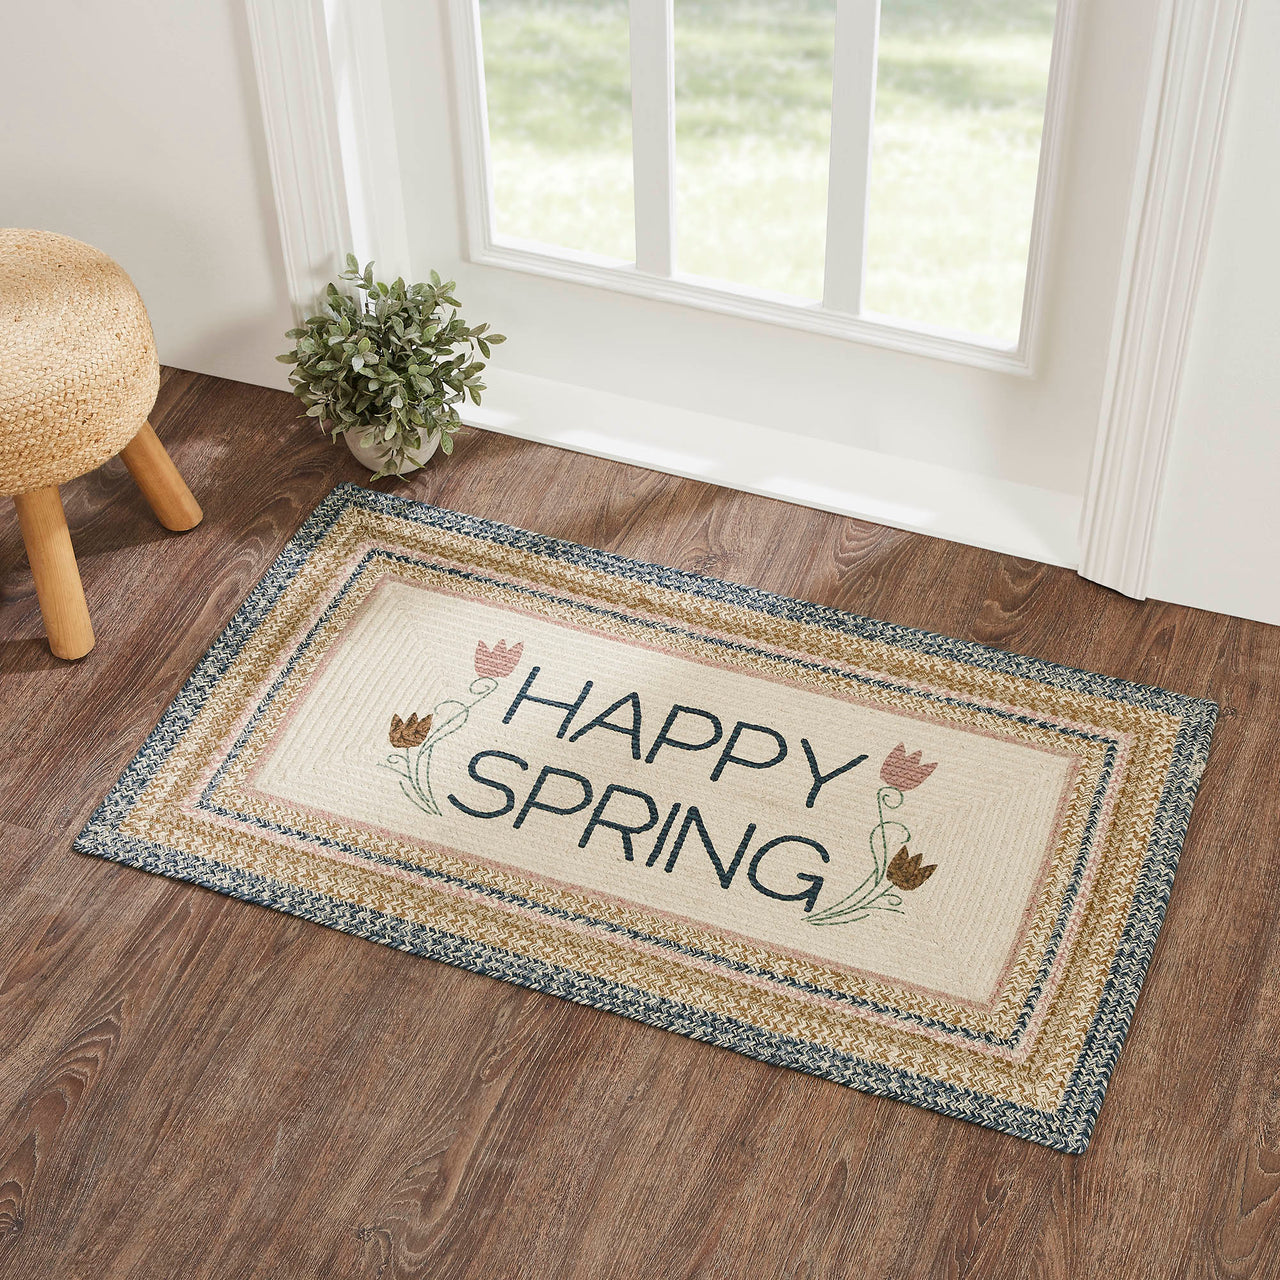 Kaila Happy Spring Jute Braided Rug Rect. with Rug Pad 27"x48" VHC Brands